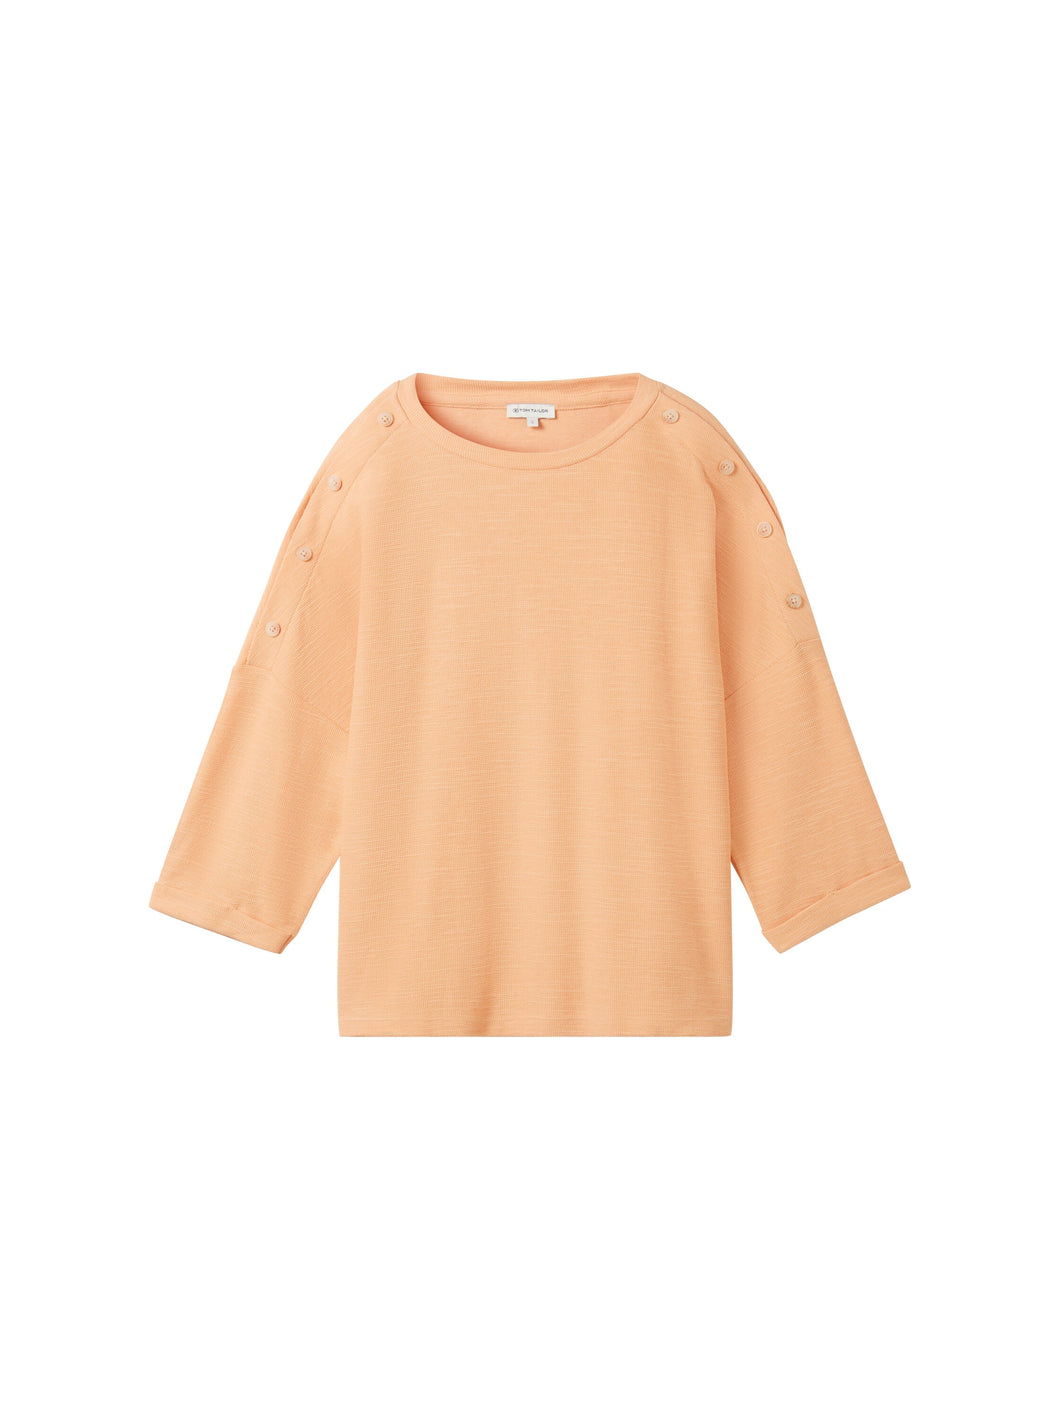 TOM TAILOR T-SHIRT WITH BUTTONS light coral